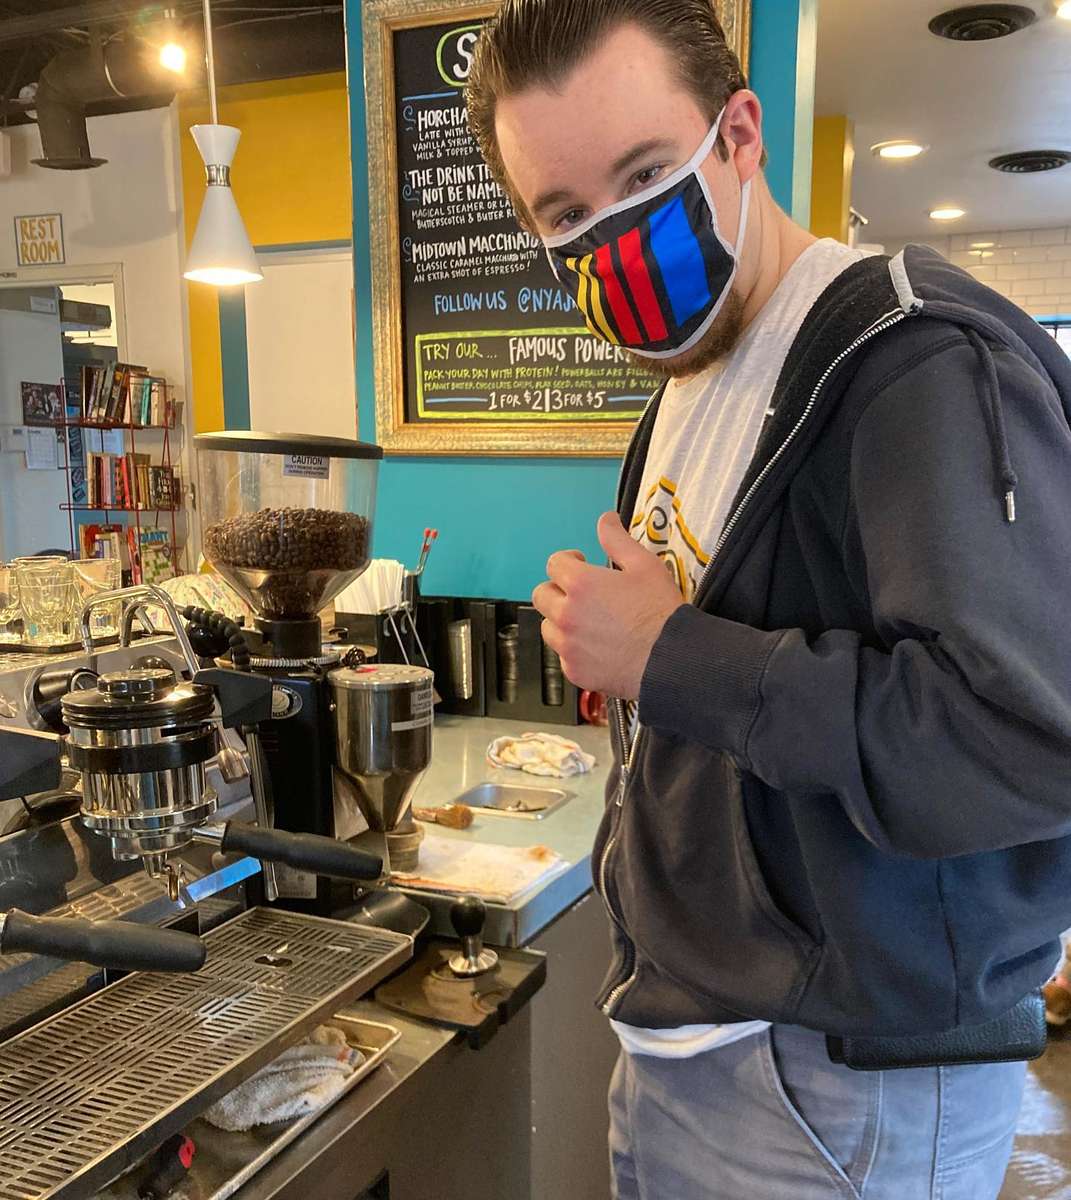 Brandon prepping coffee for the day